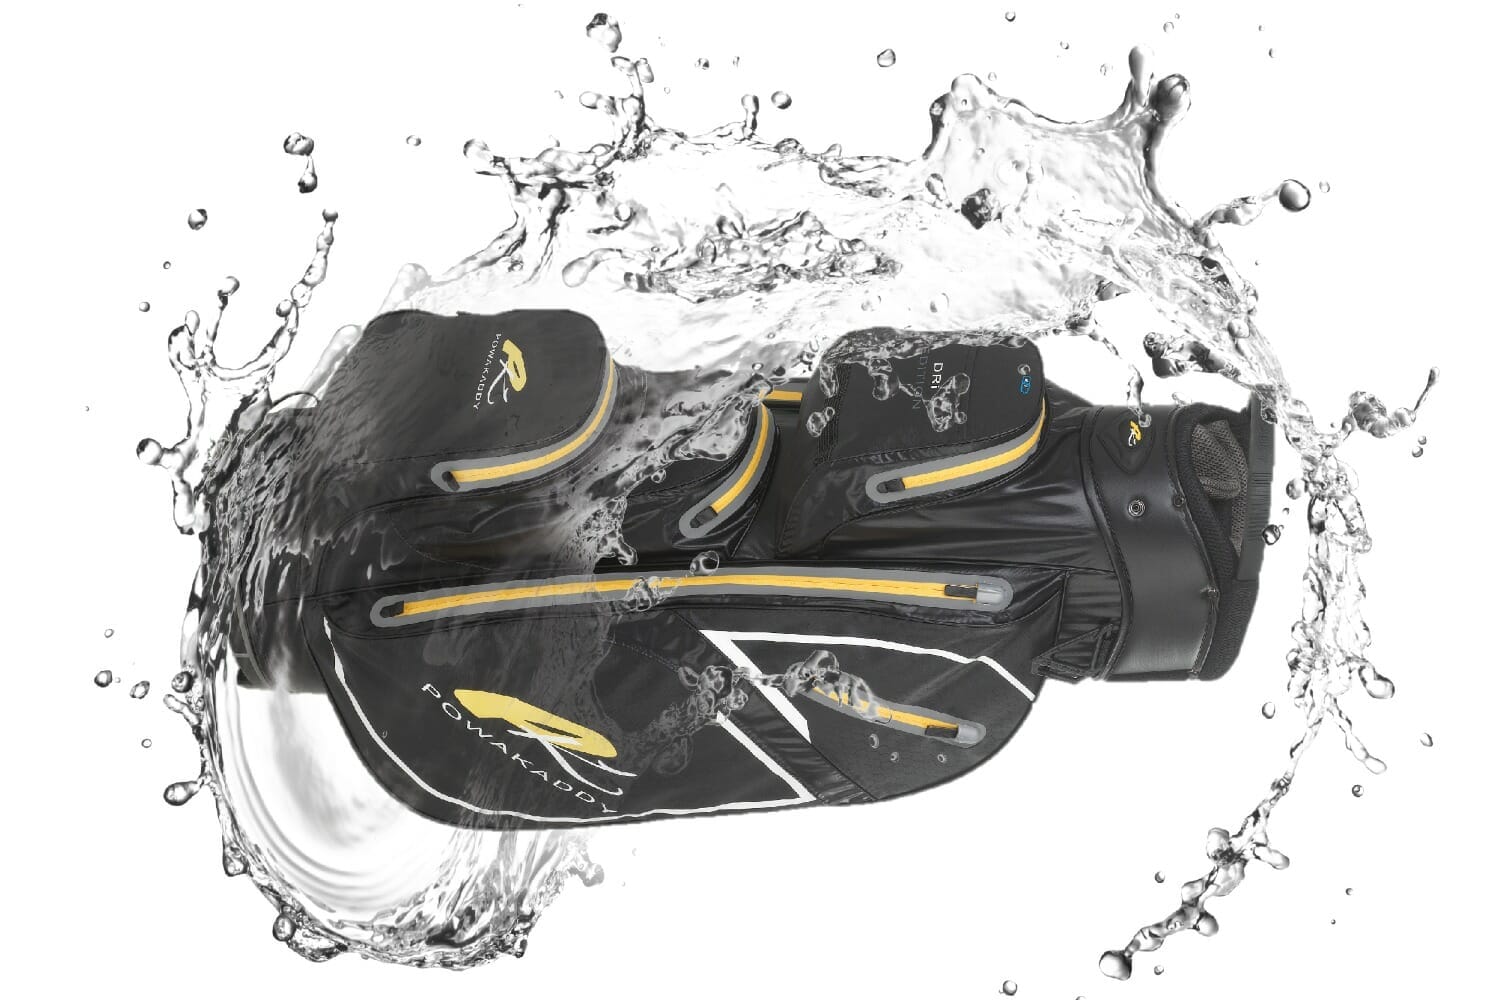 Waterproof your game with the PowaKaddy Dri-Edition bag